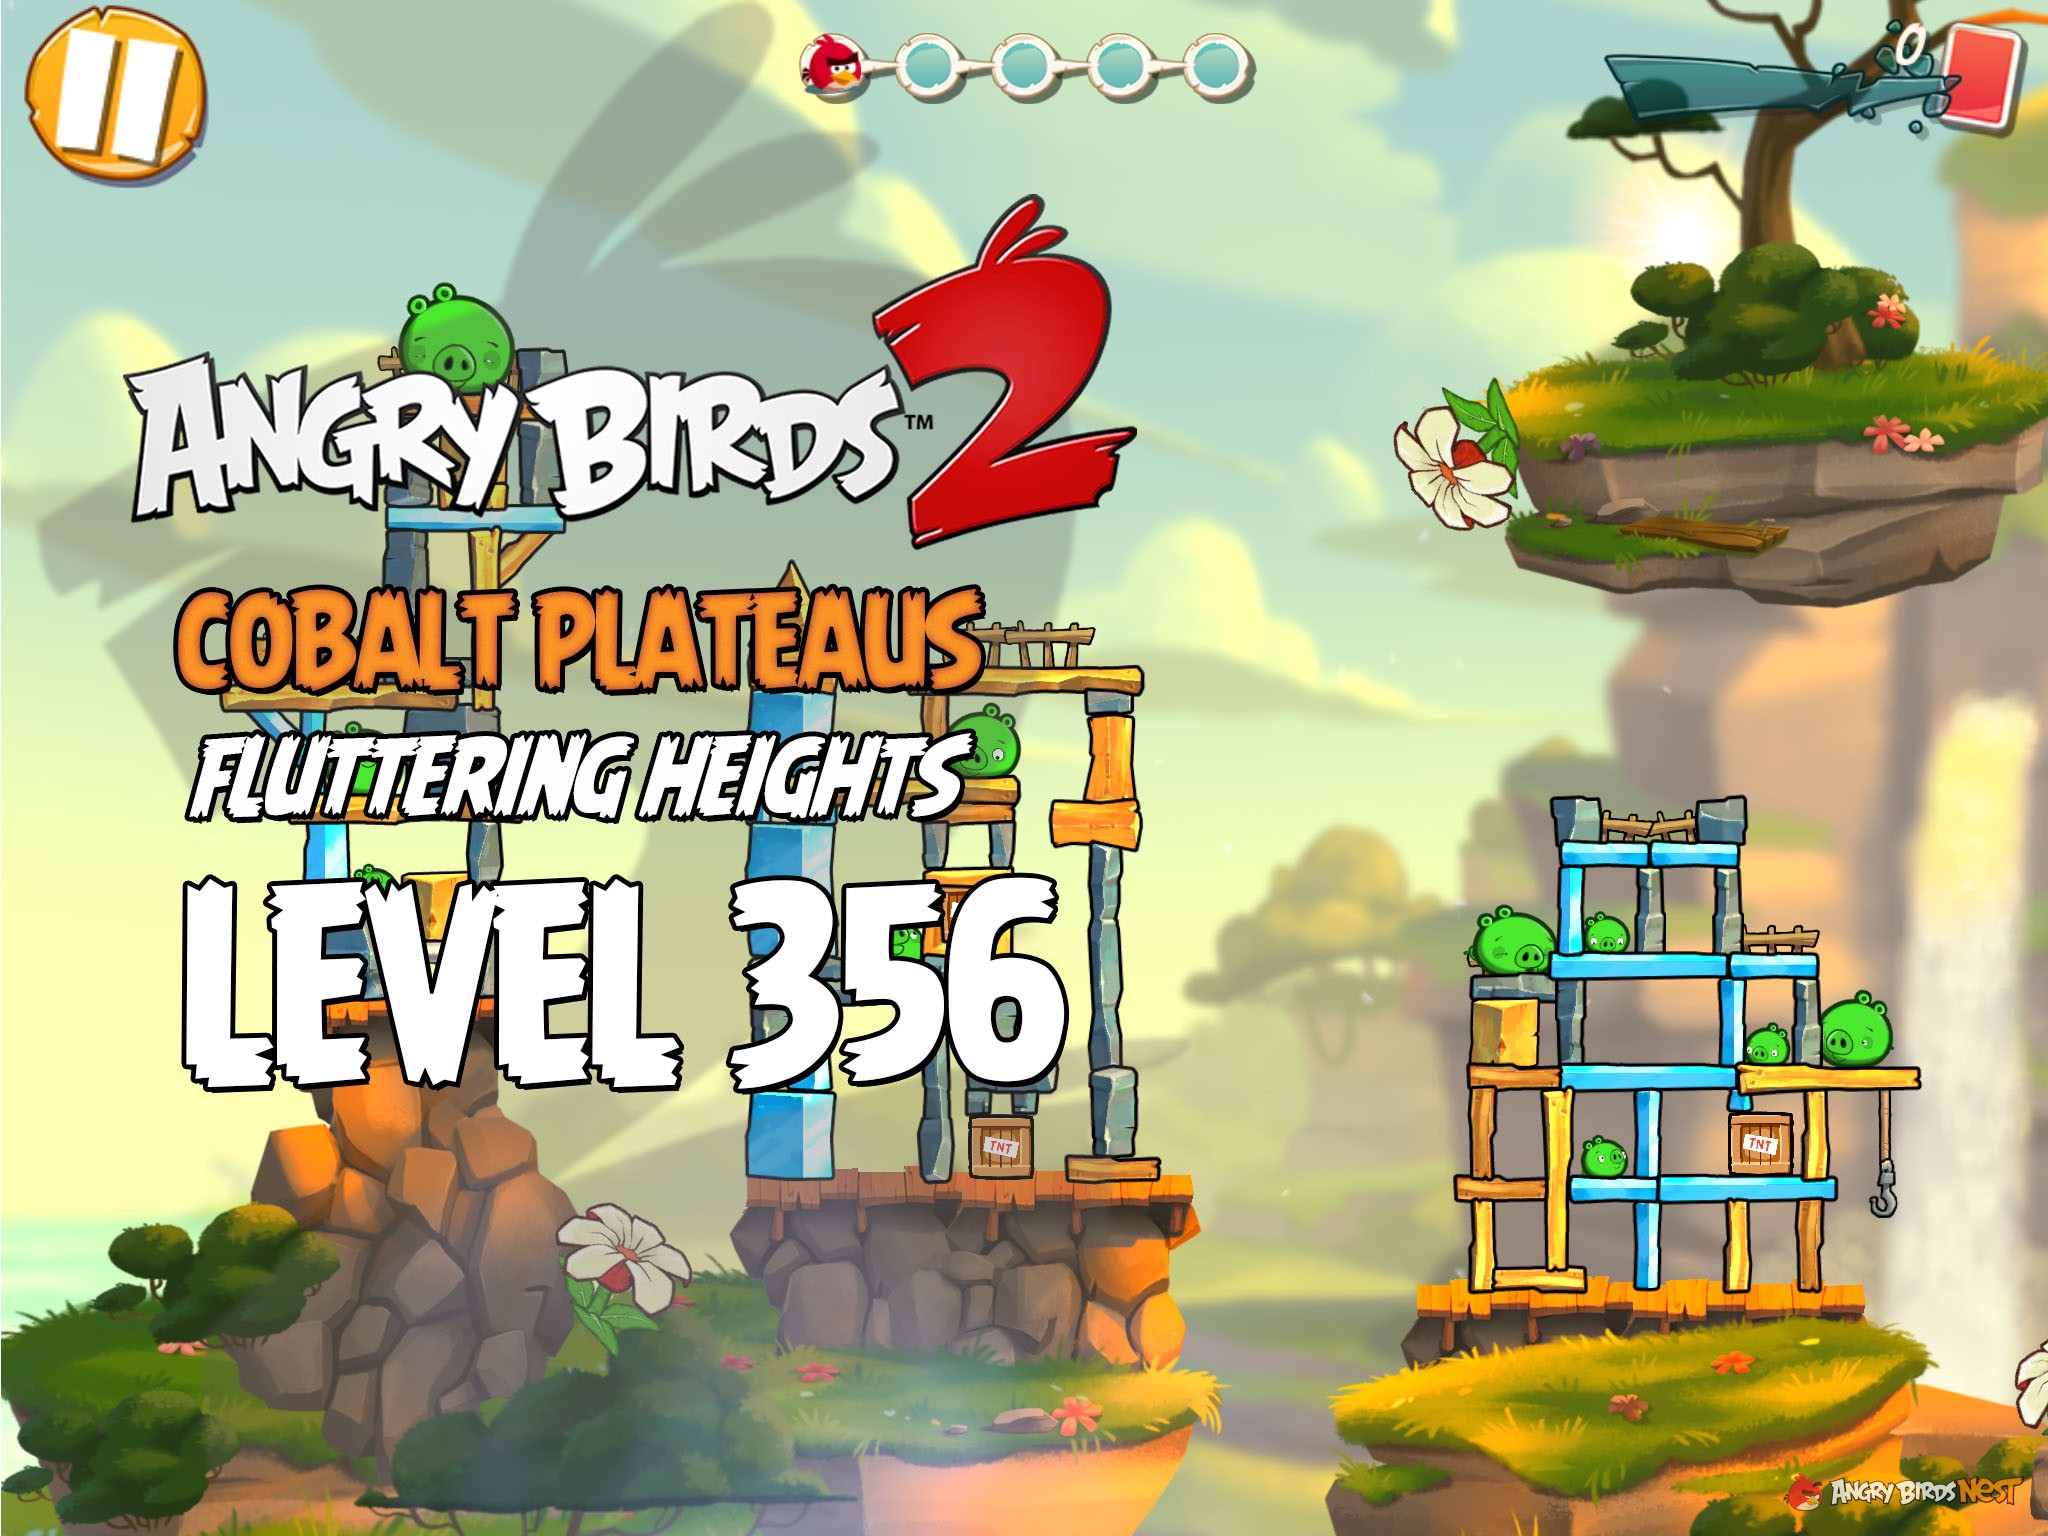 Angry Birds 2 Cobalt Plateaus Fluttering Heights Level 356